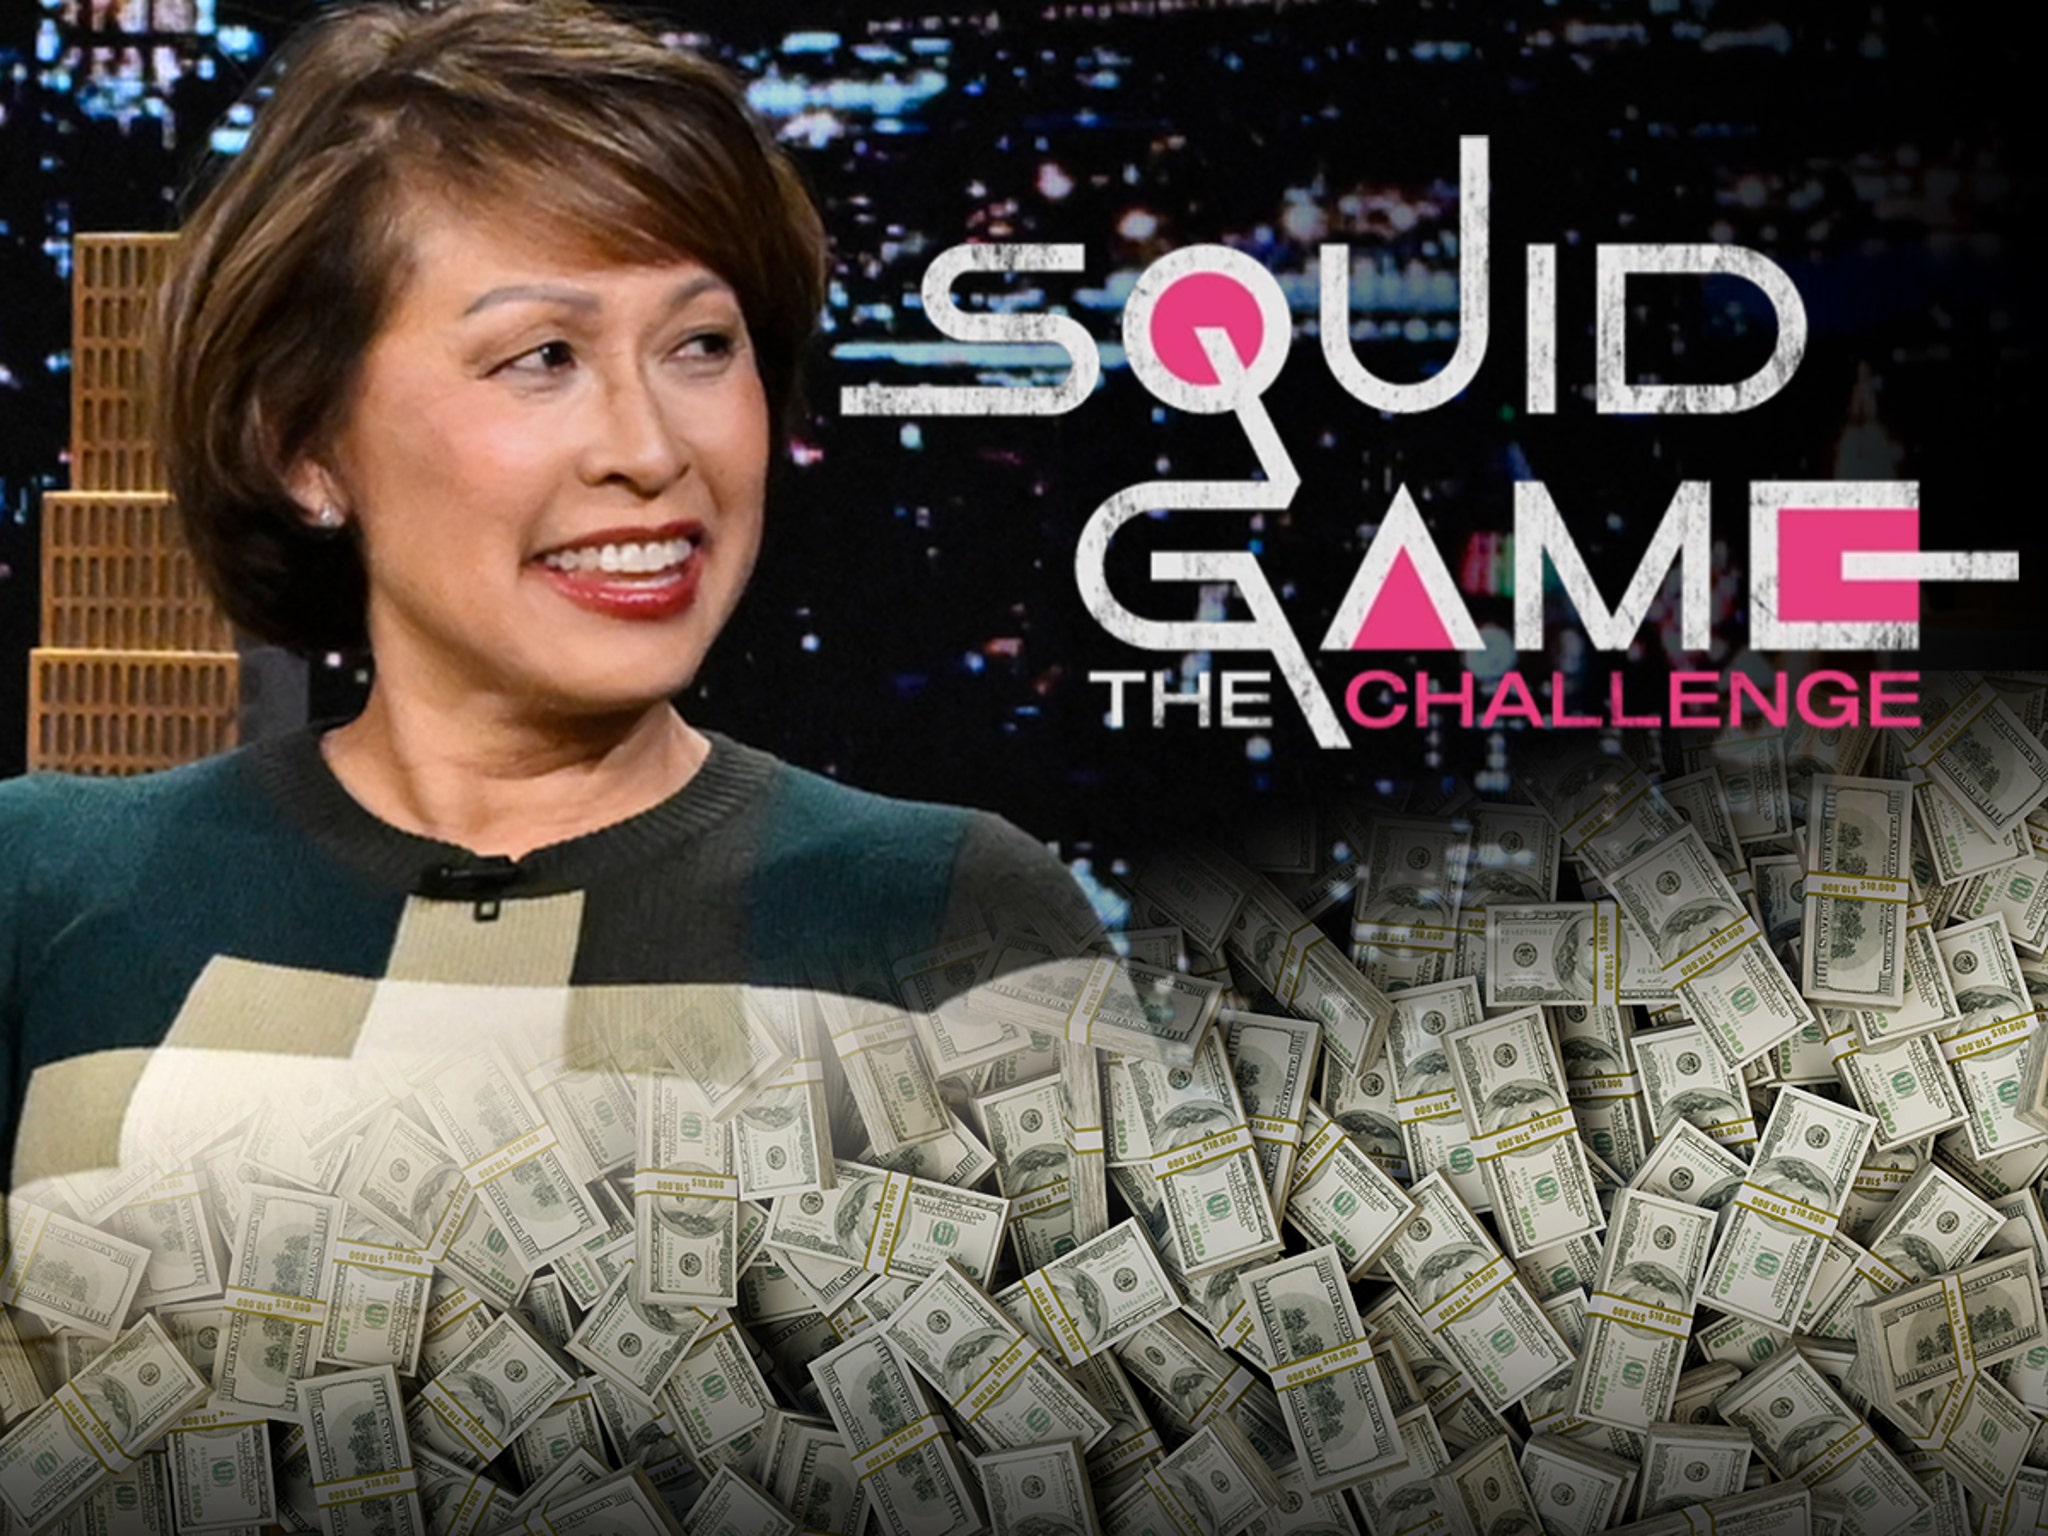 How Much Did Mai Get For Winning 'Squid Game: The Challenge'? She Didn't  Receive The Whole Prize